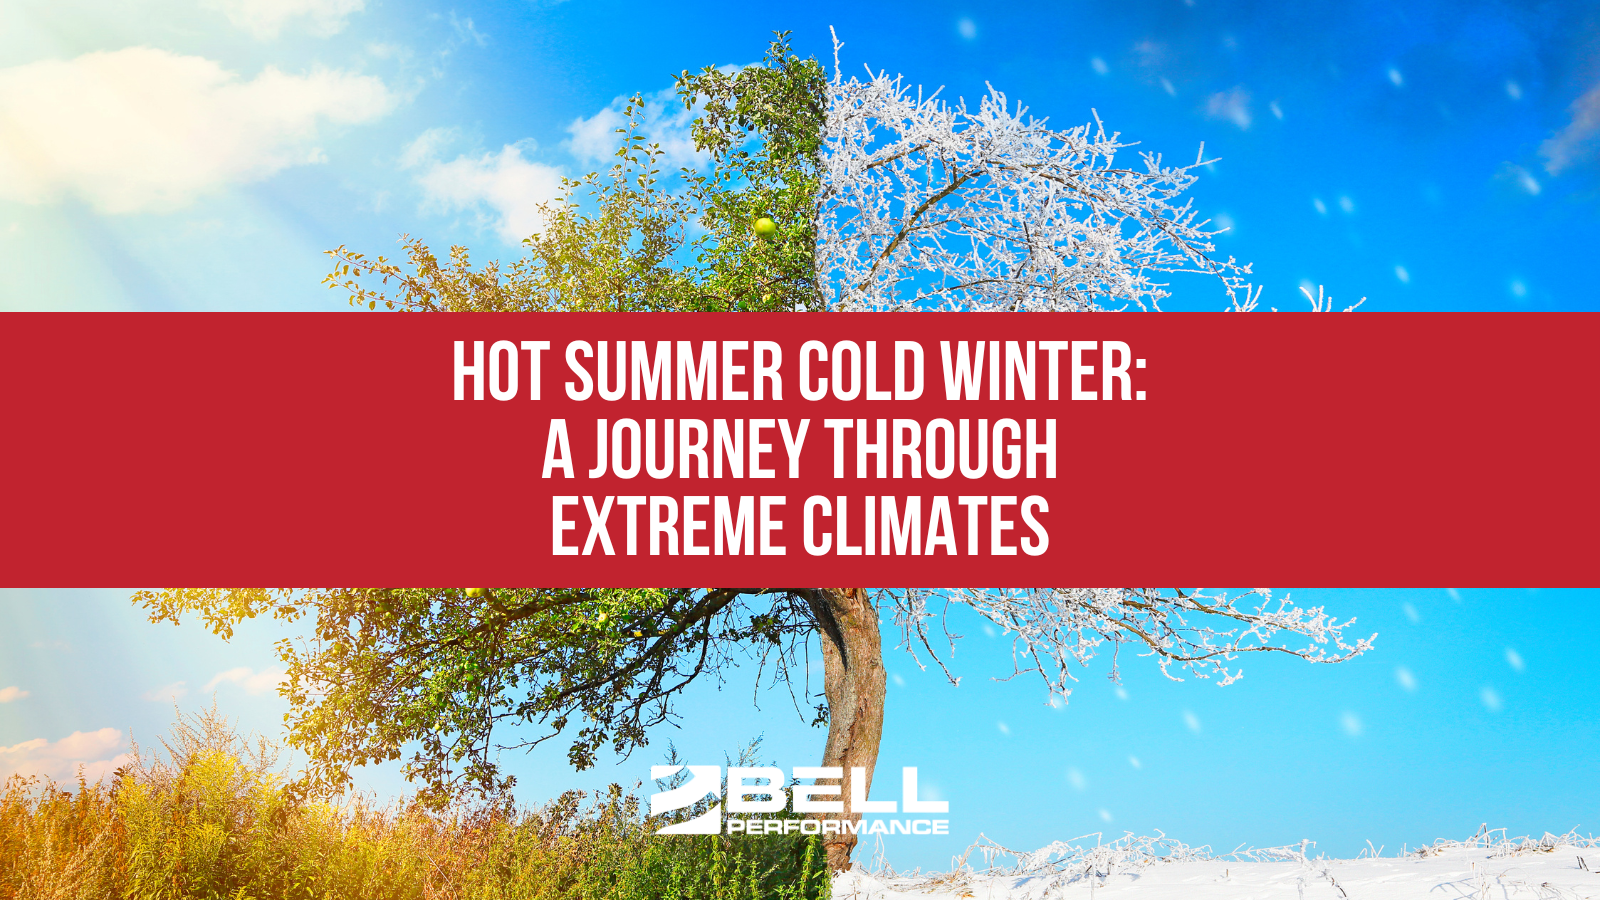 Hot Summer Cold Winter: A Journey Through Extreme Climates